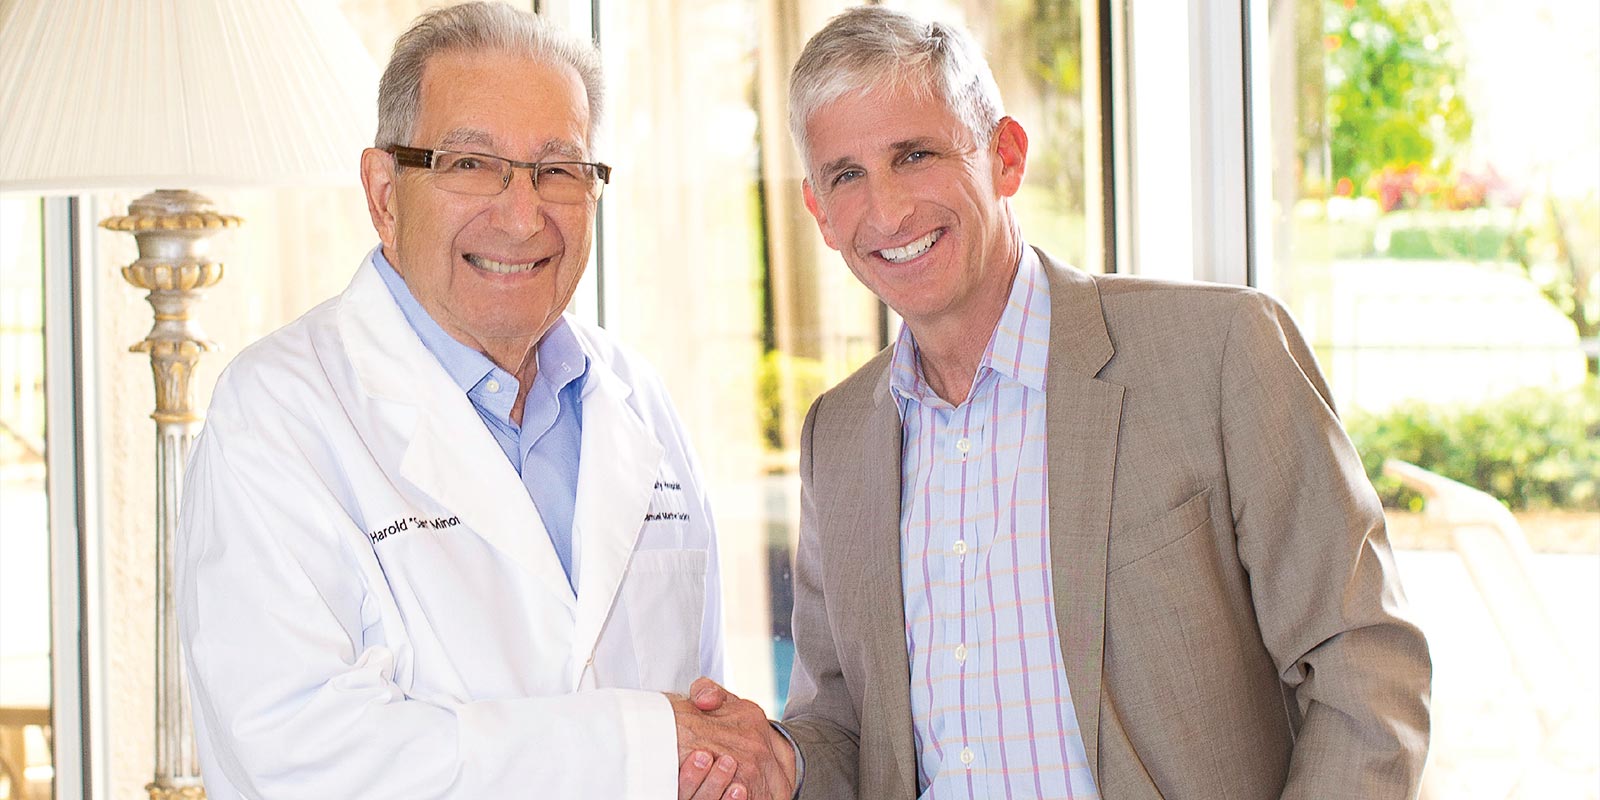 Sam Minoff (left) wearing his white coat from the 2018 Mather Society induction ceremony with Daniel I. Simon, MD